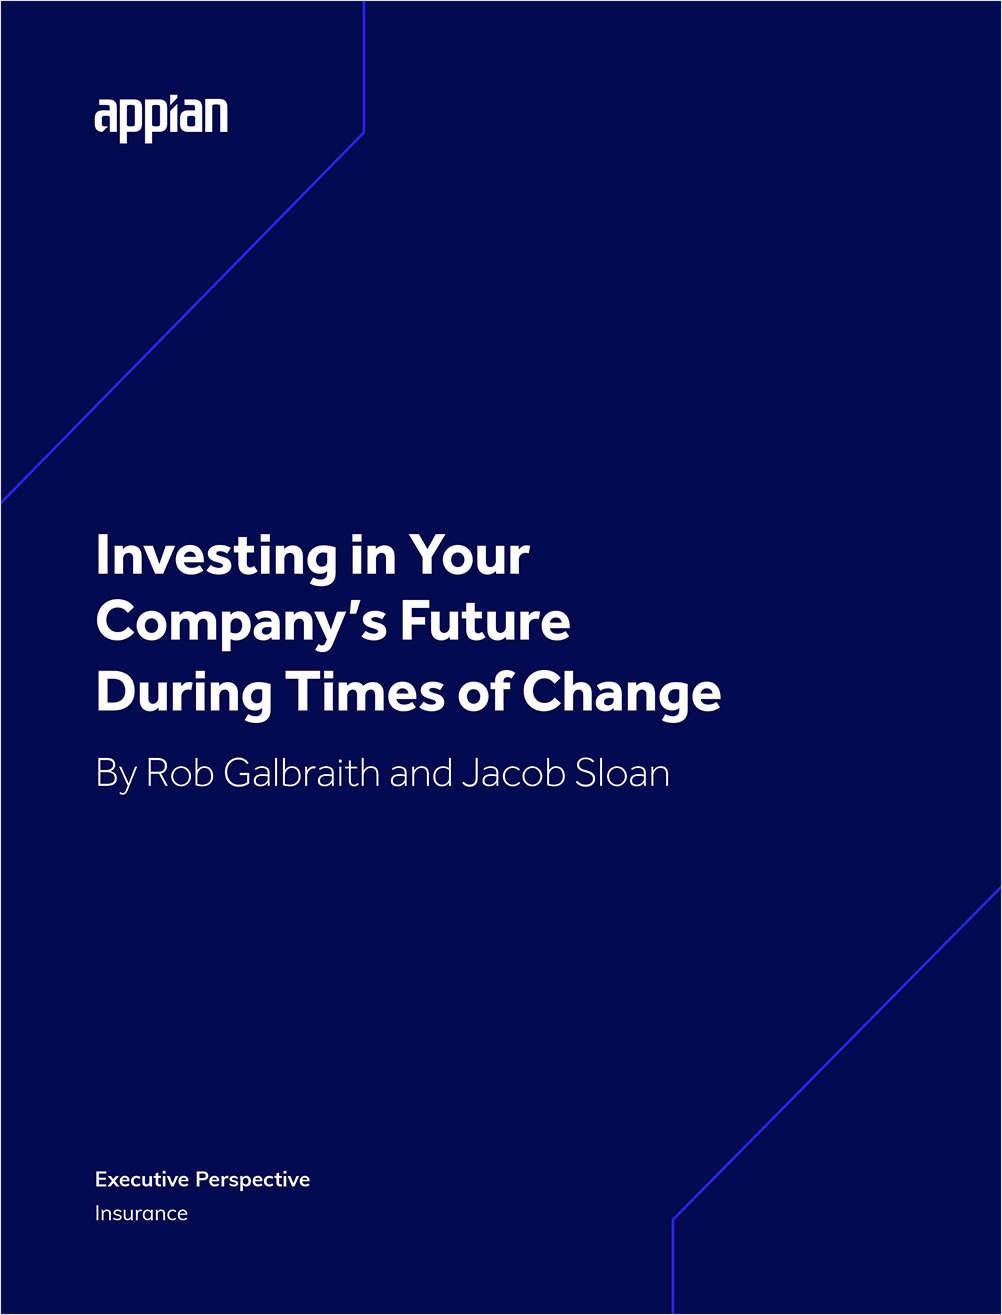 Investing in Your Company's Future During Times of Change